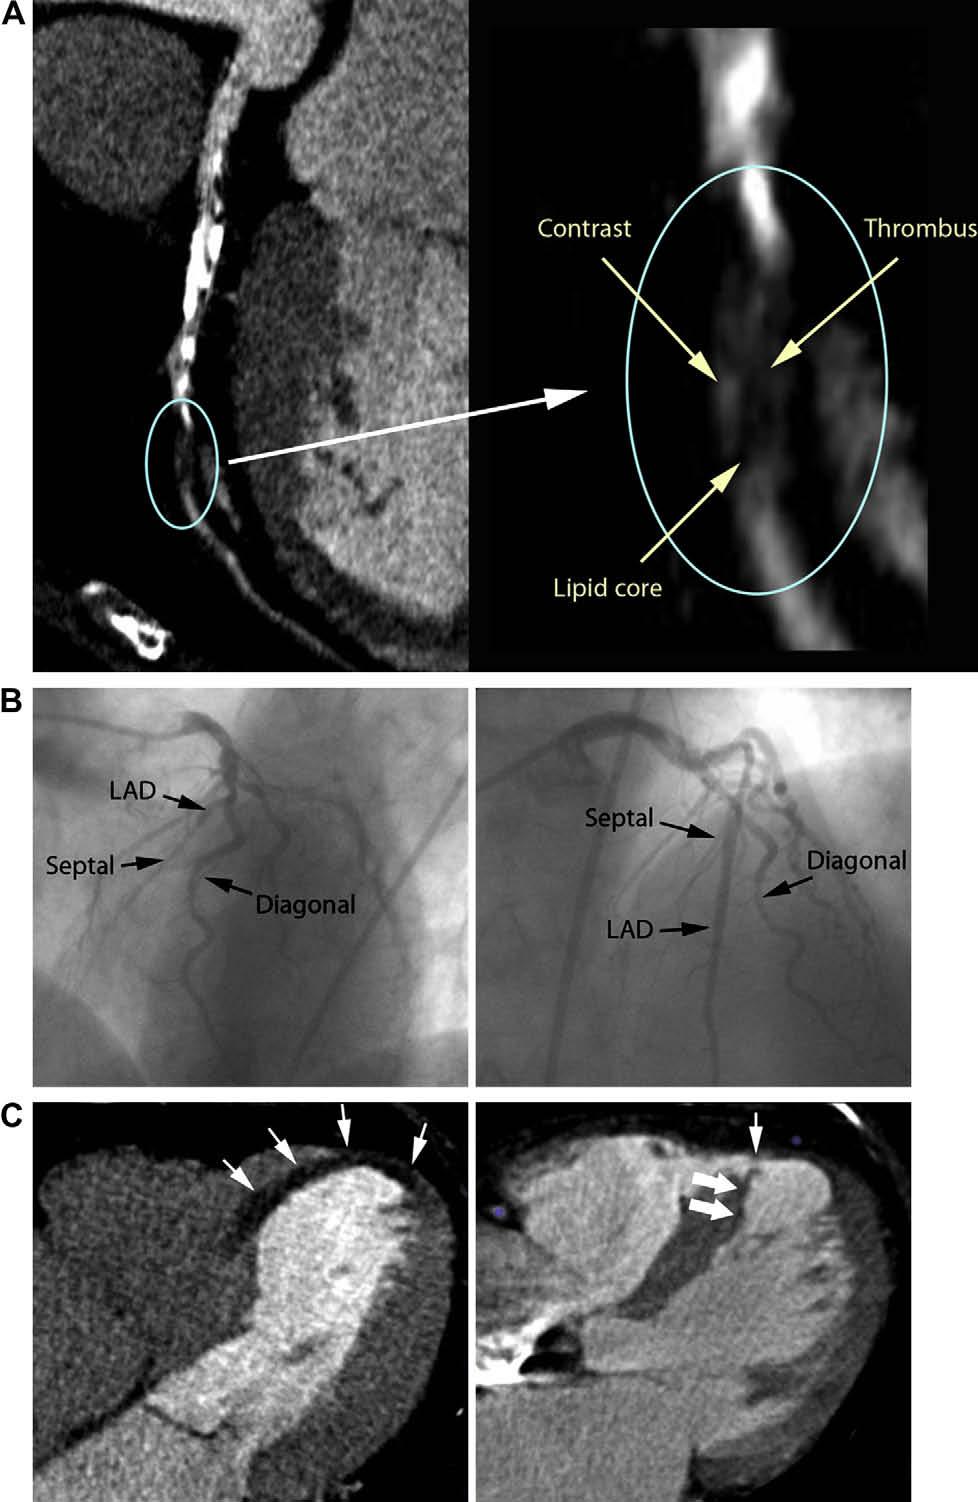 274 Journal of Cardiovascular Computed Tomography, Vol 3, No 4, July/August 2009 Figure 2 CCTA and catheter-based angiography: totally occluded left anterior descending (LAD) artery.